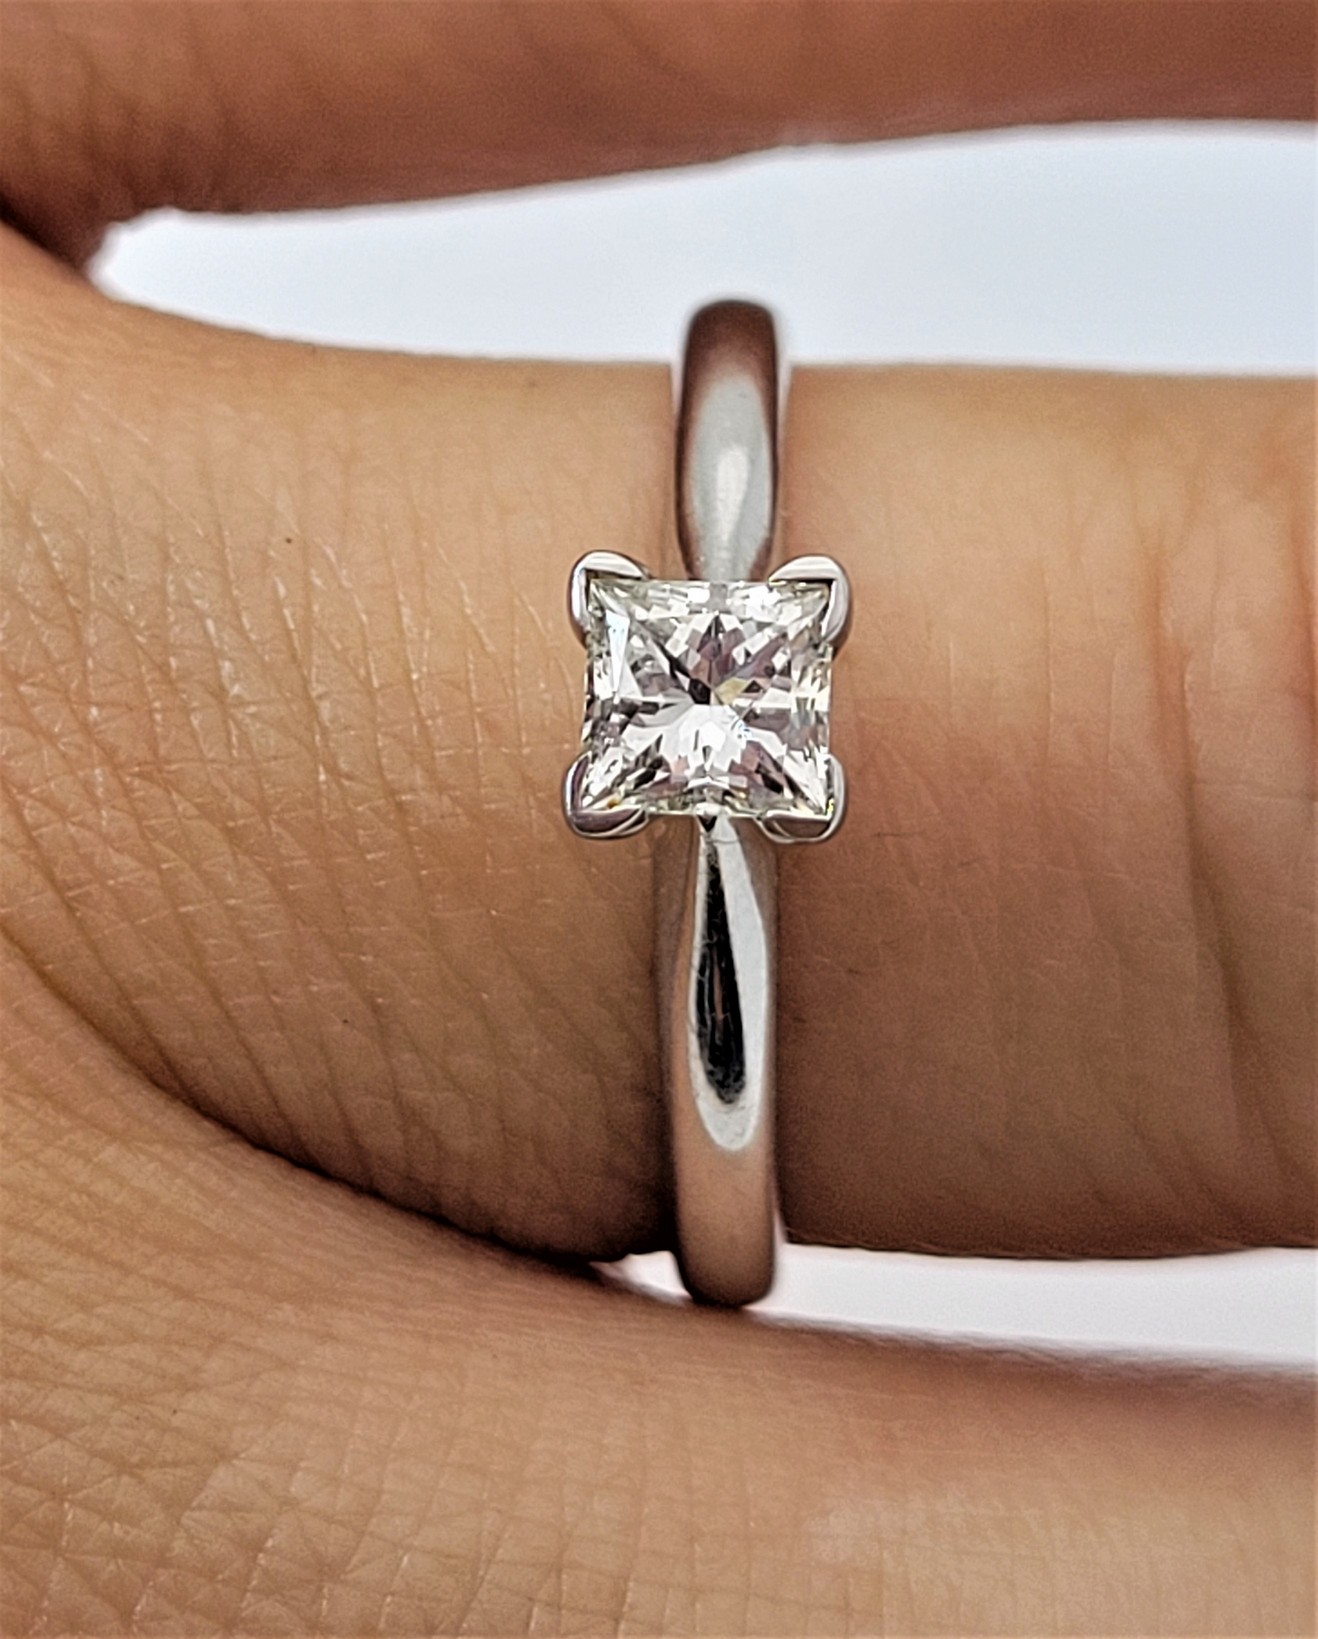 At Auction: Vintage 14K White Gold Jewelry Ring